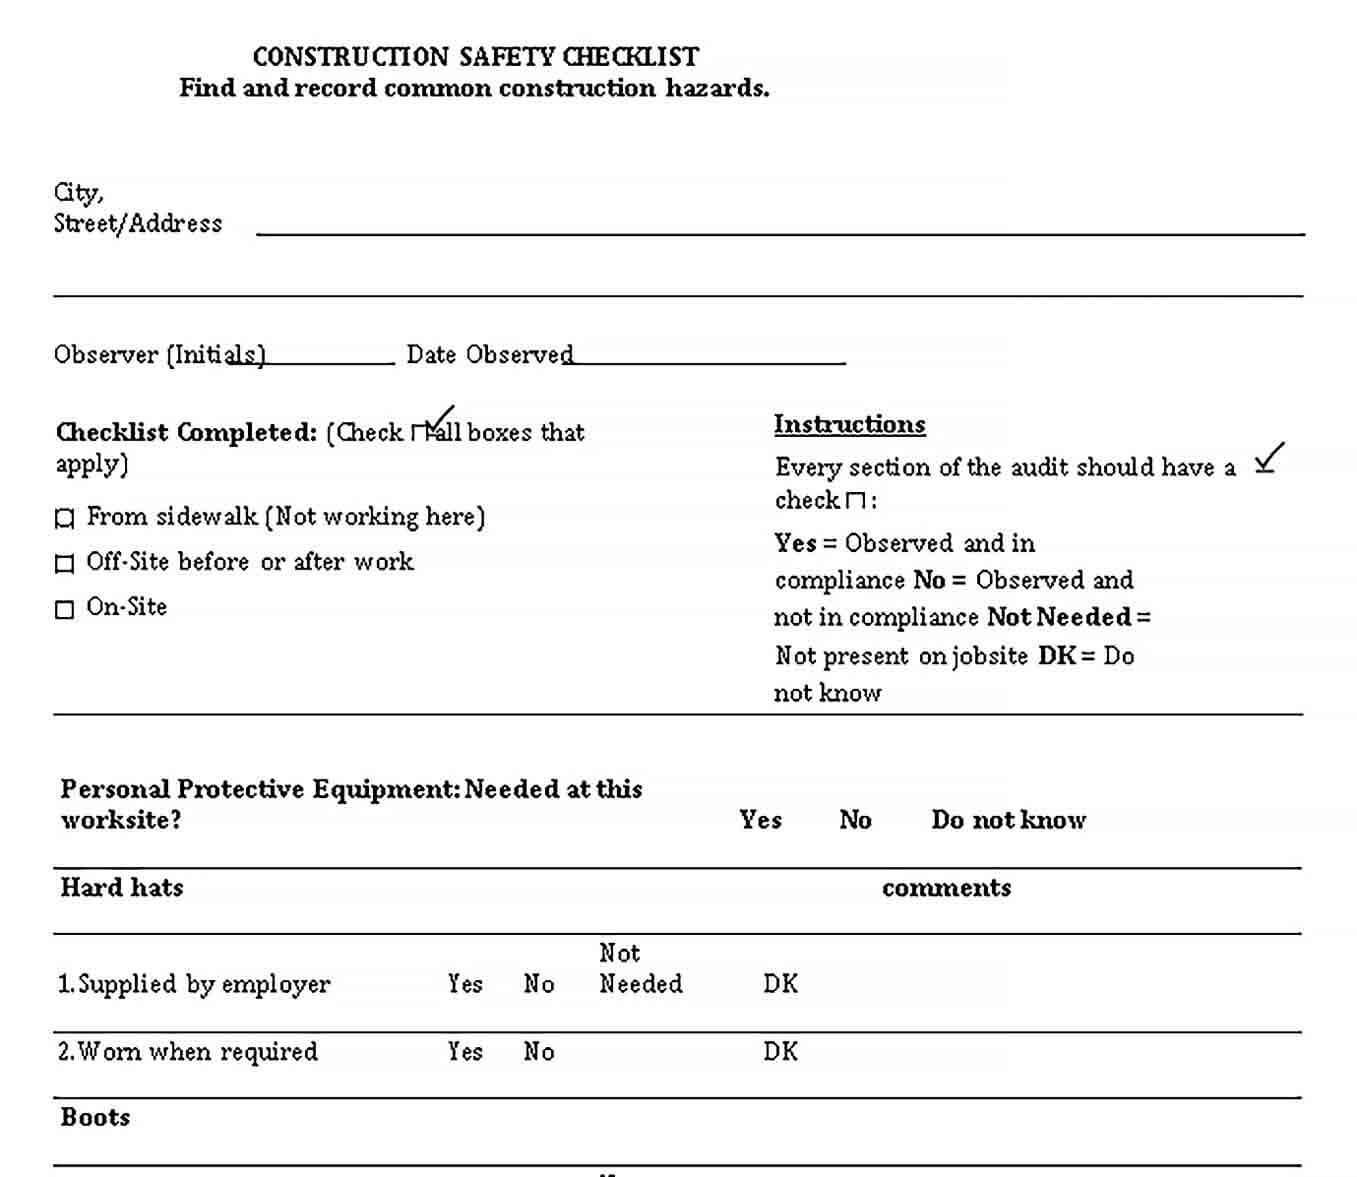 Sample Construction Safety Checklist Template